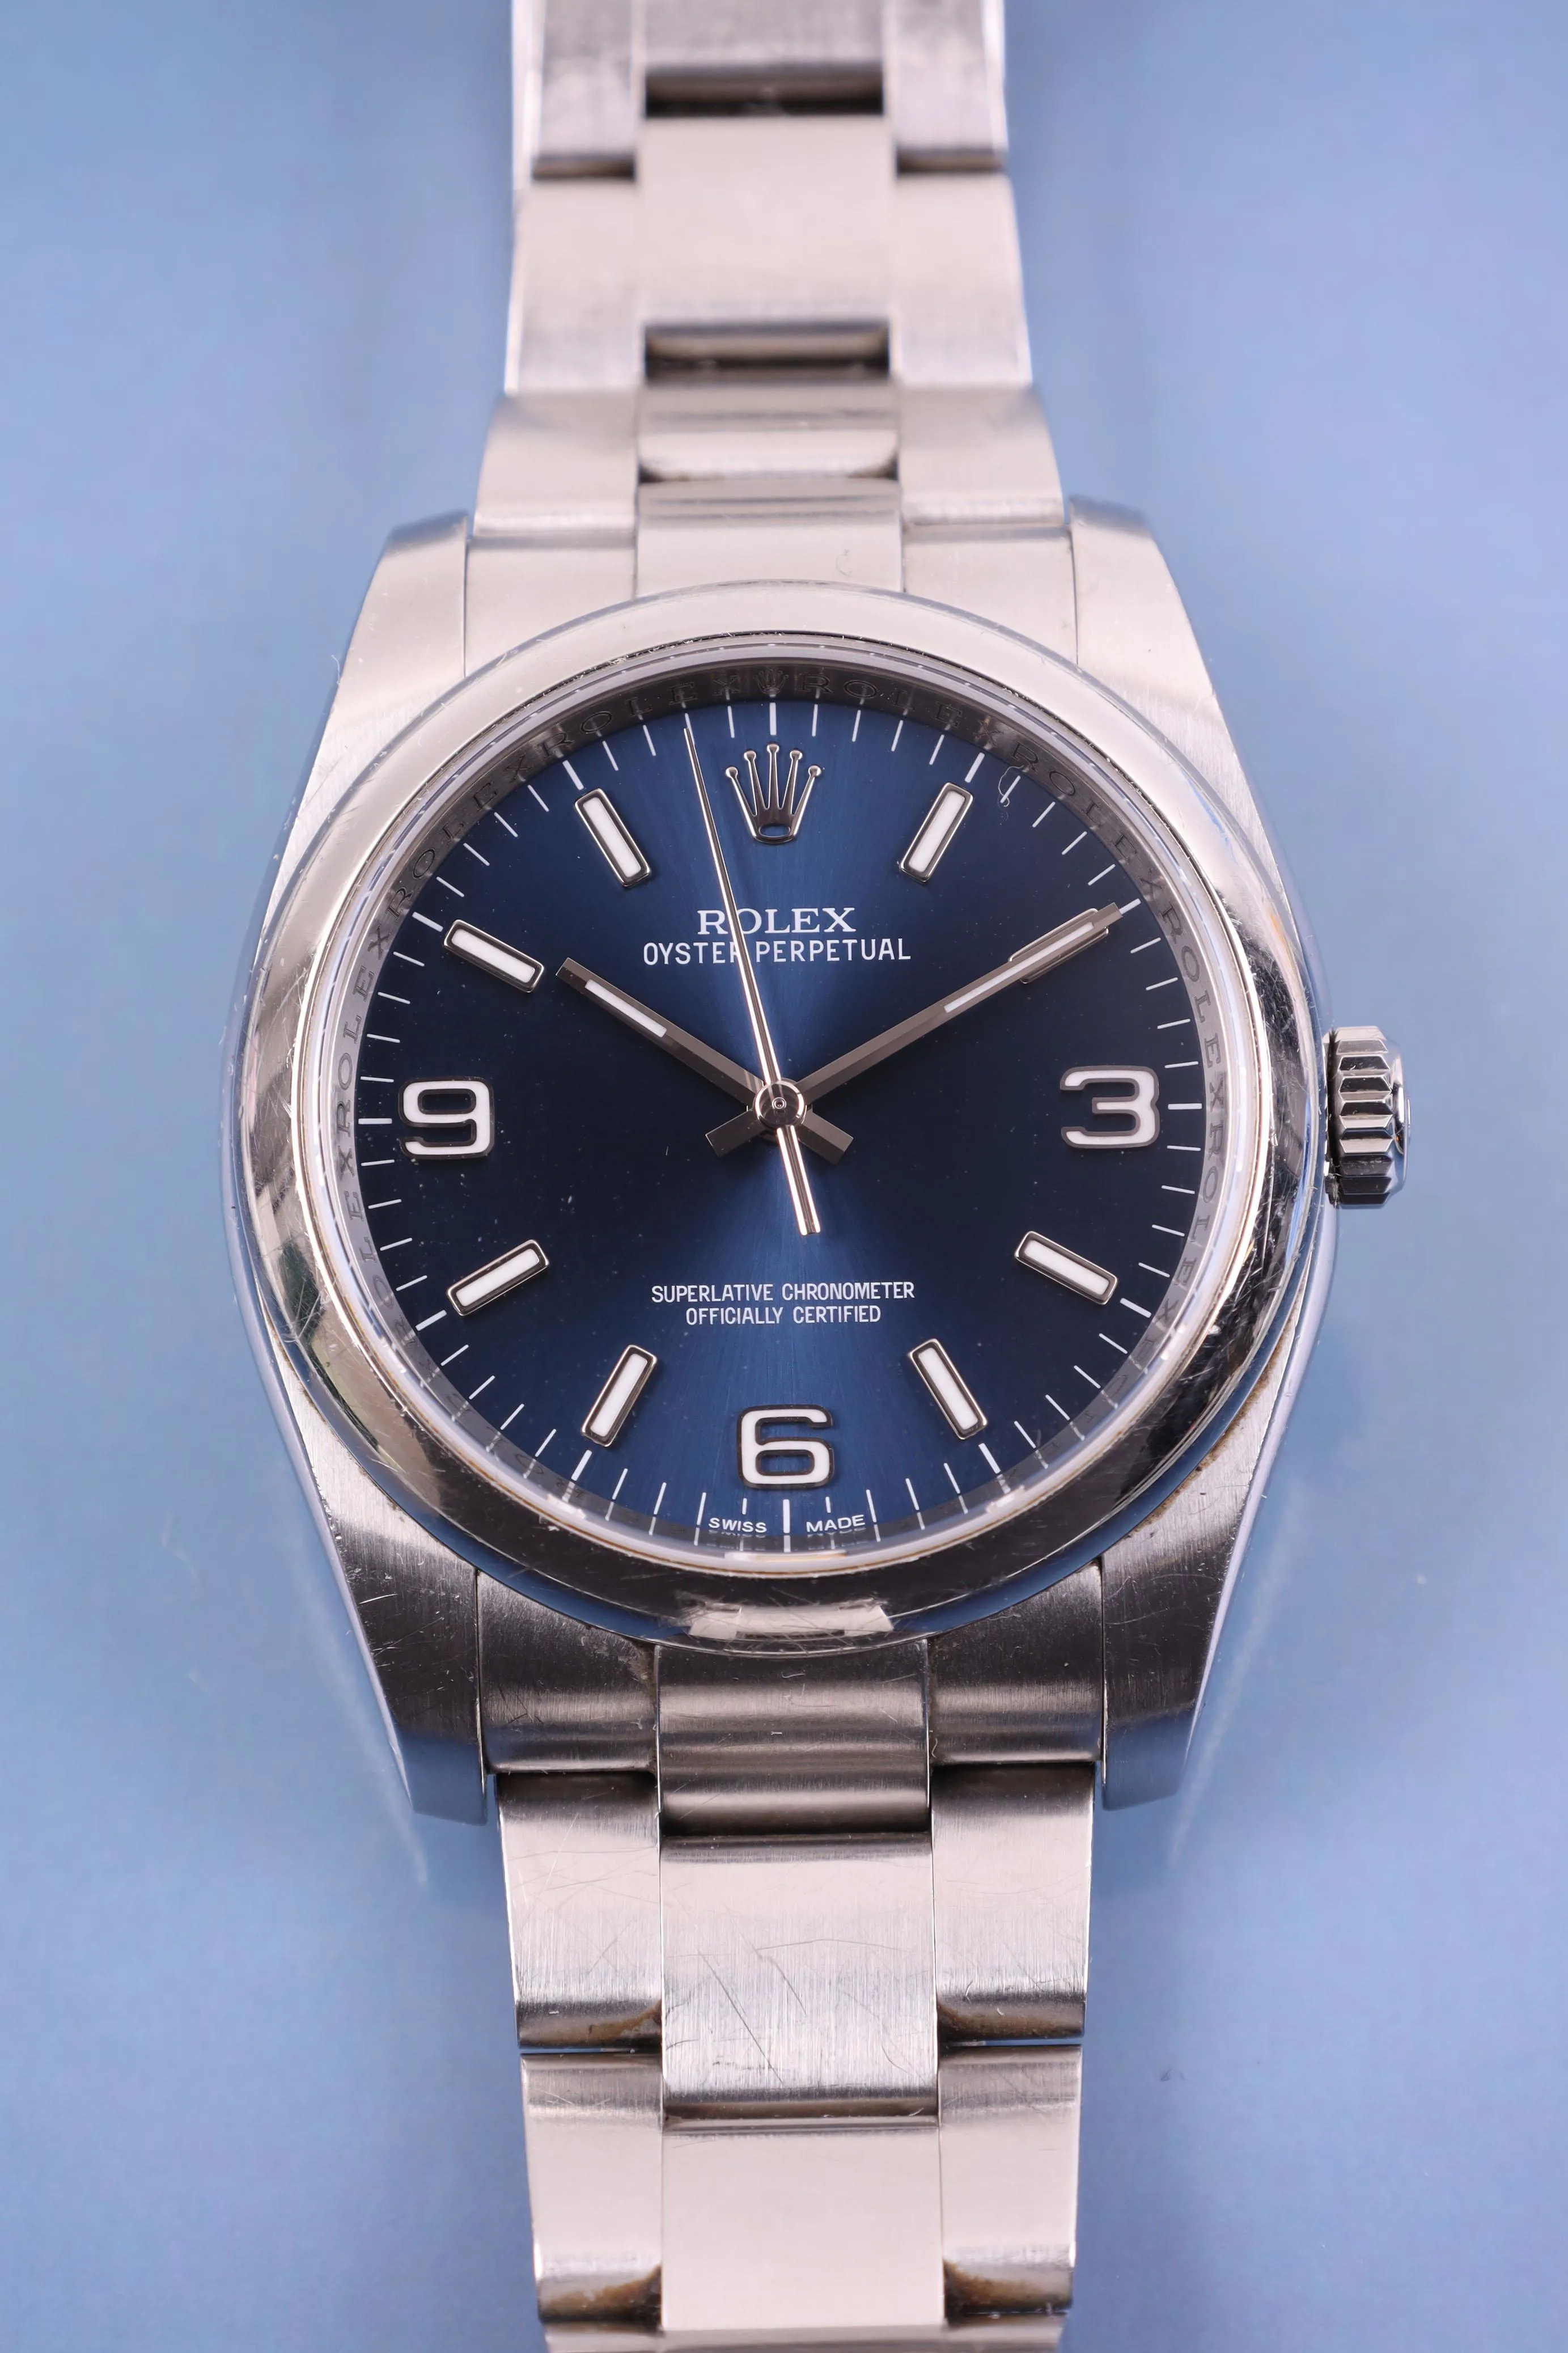 Rolex Oyster Perpetual 11600 36mm Stainless steel Blue